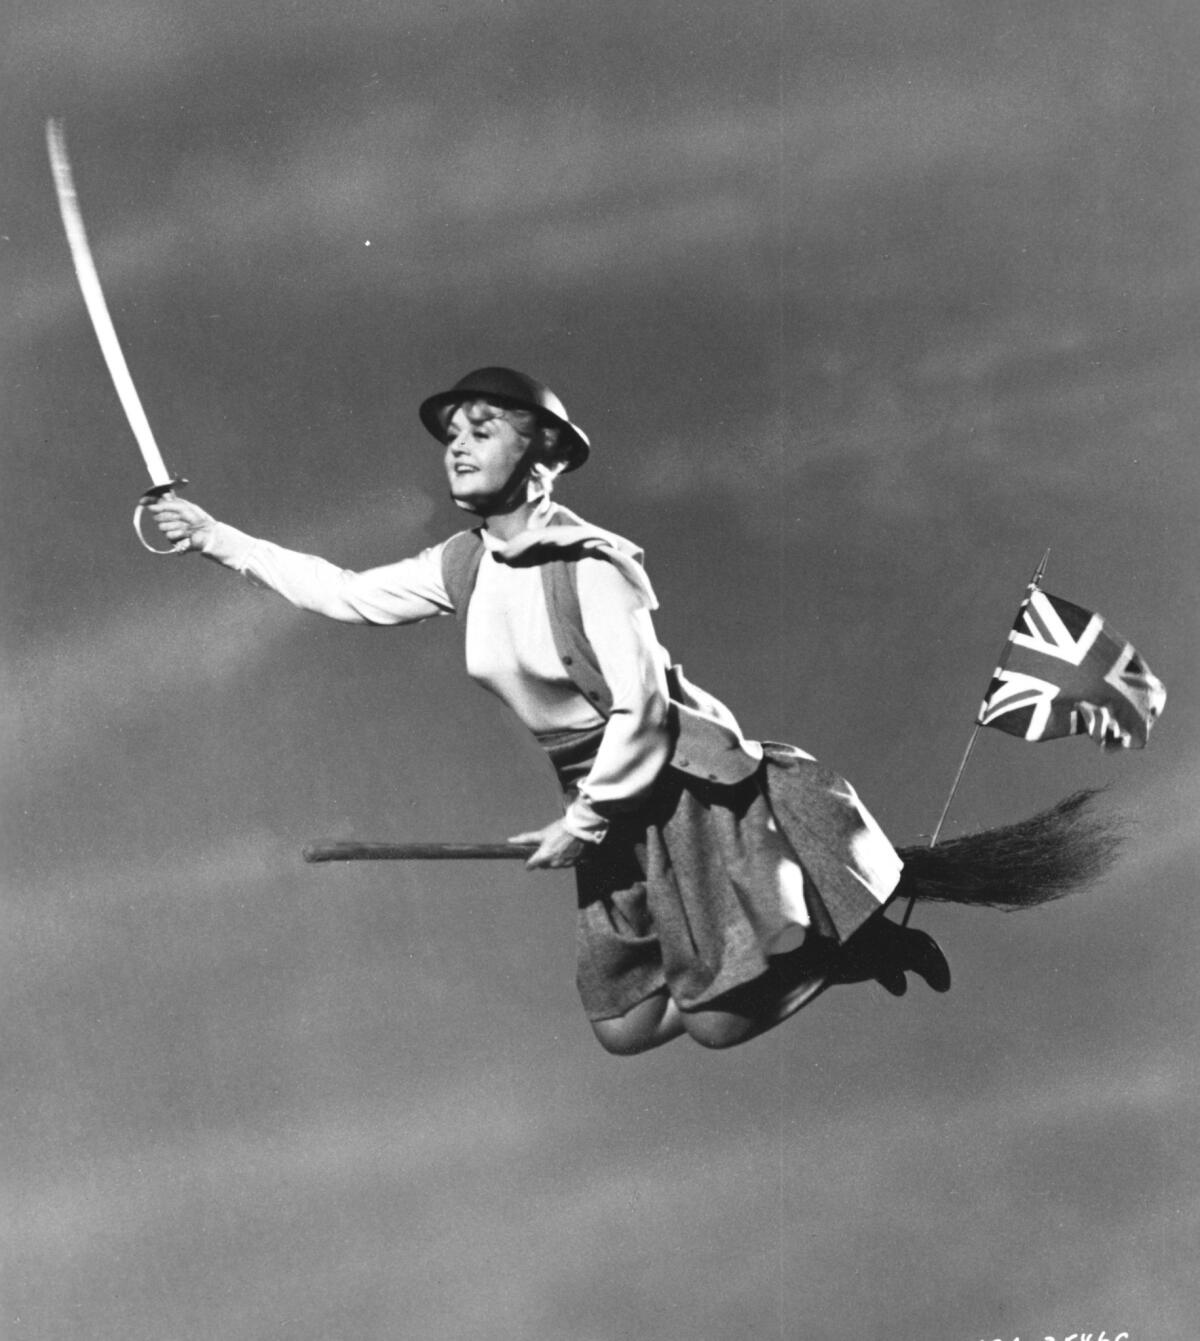 A woman holding a sword and riding a broomstick with a British flag on it